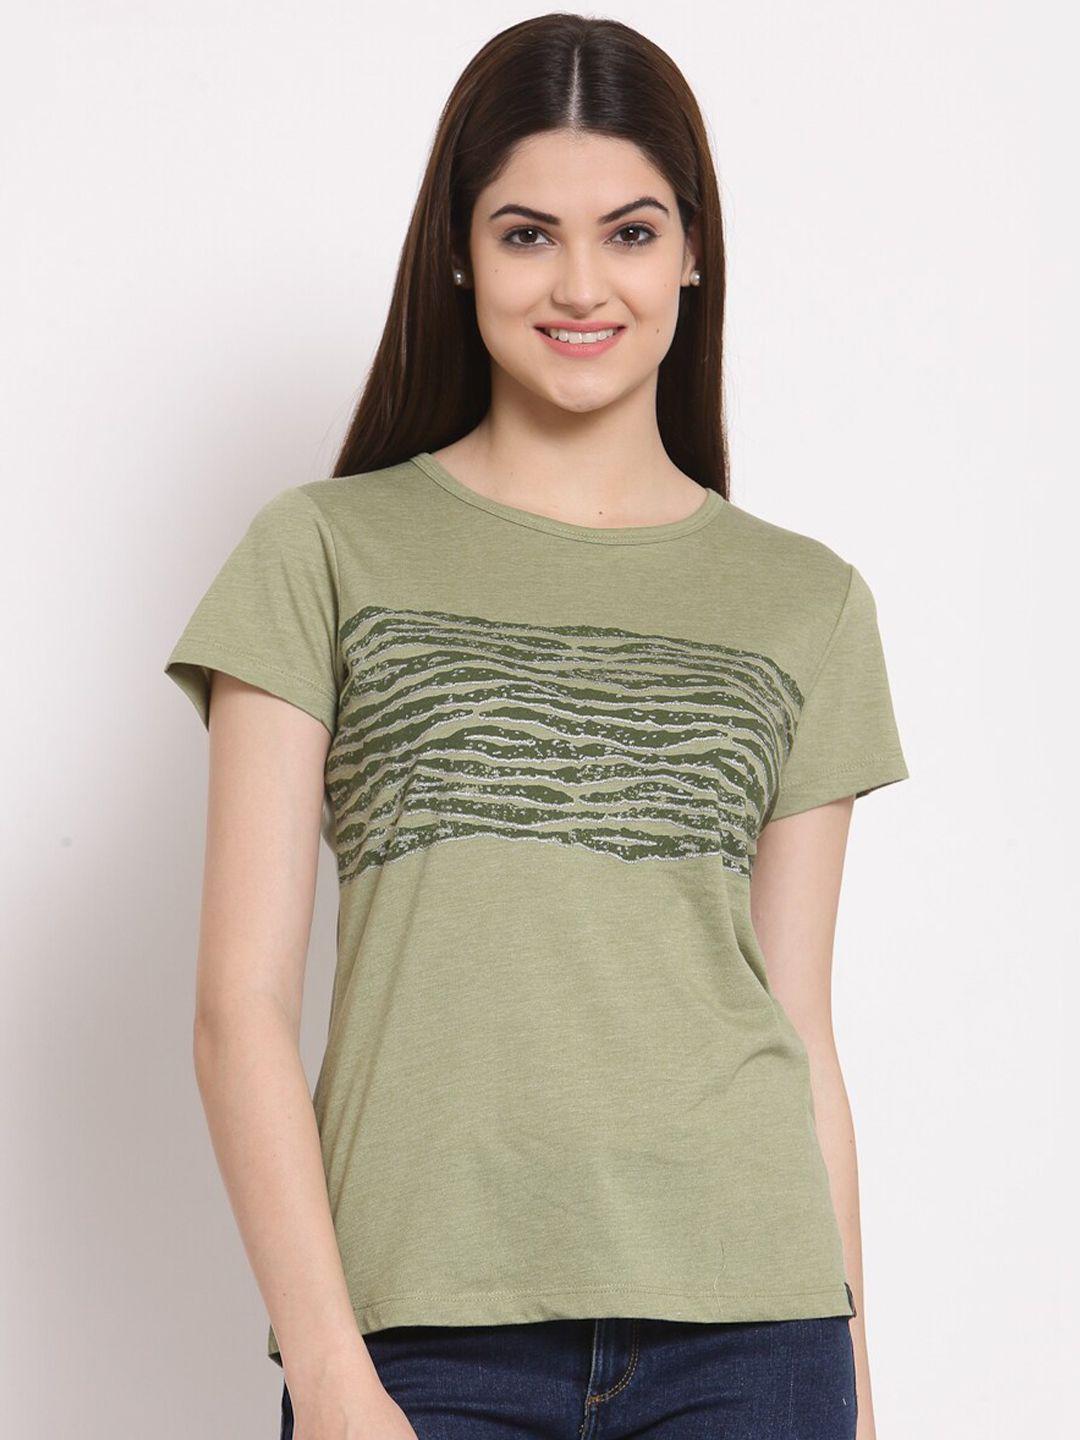 juelle women olive green printed round neck pure cotton t-shirt